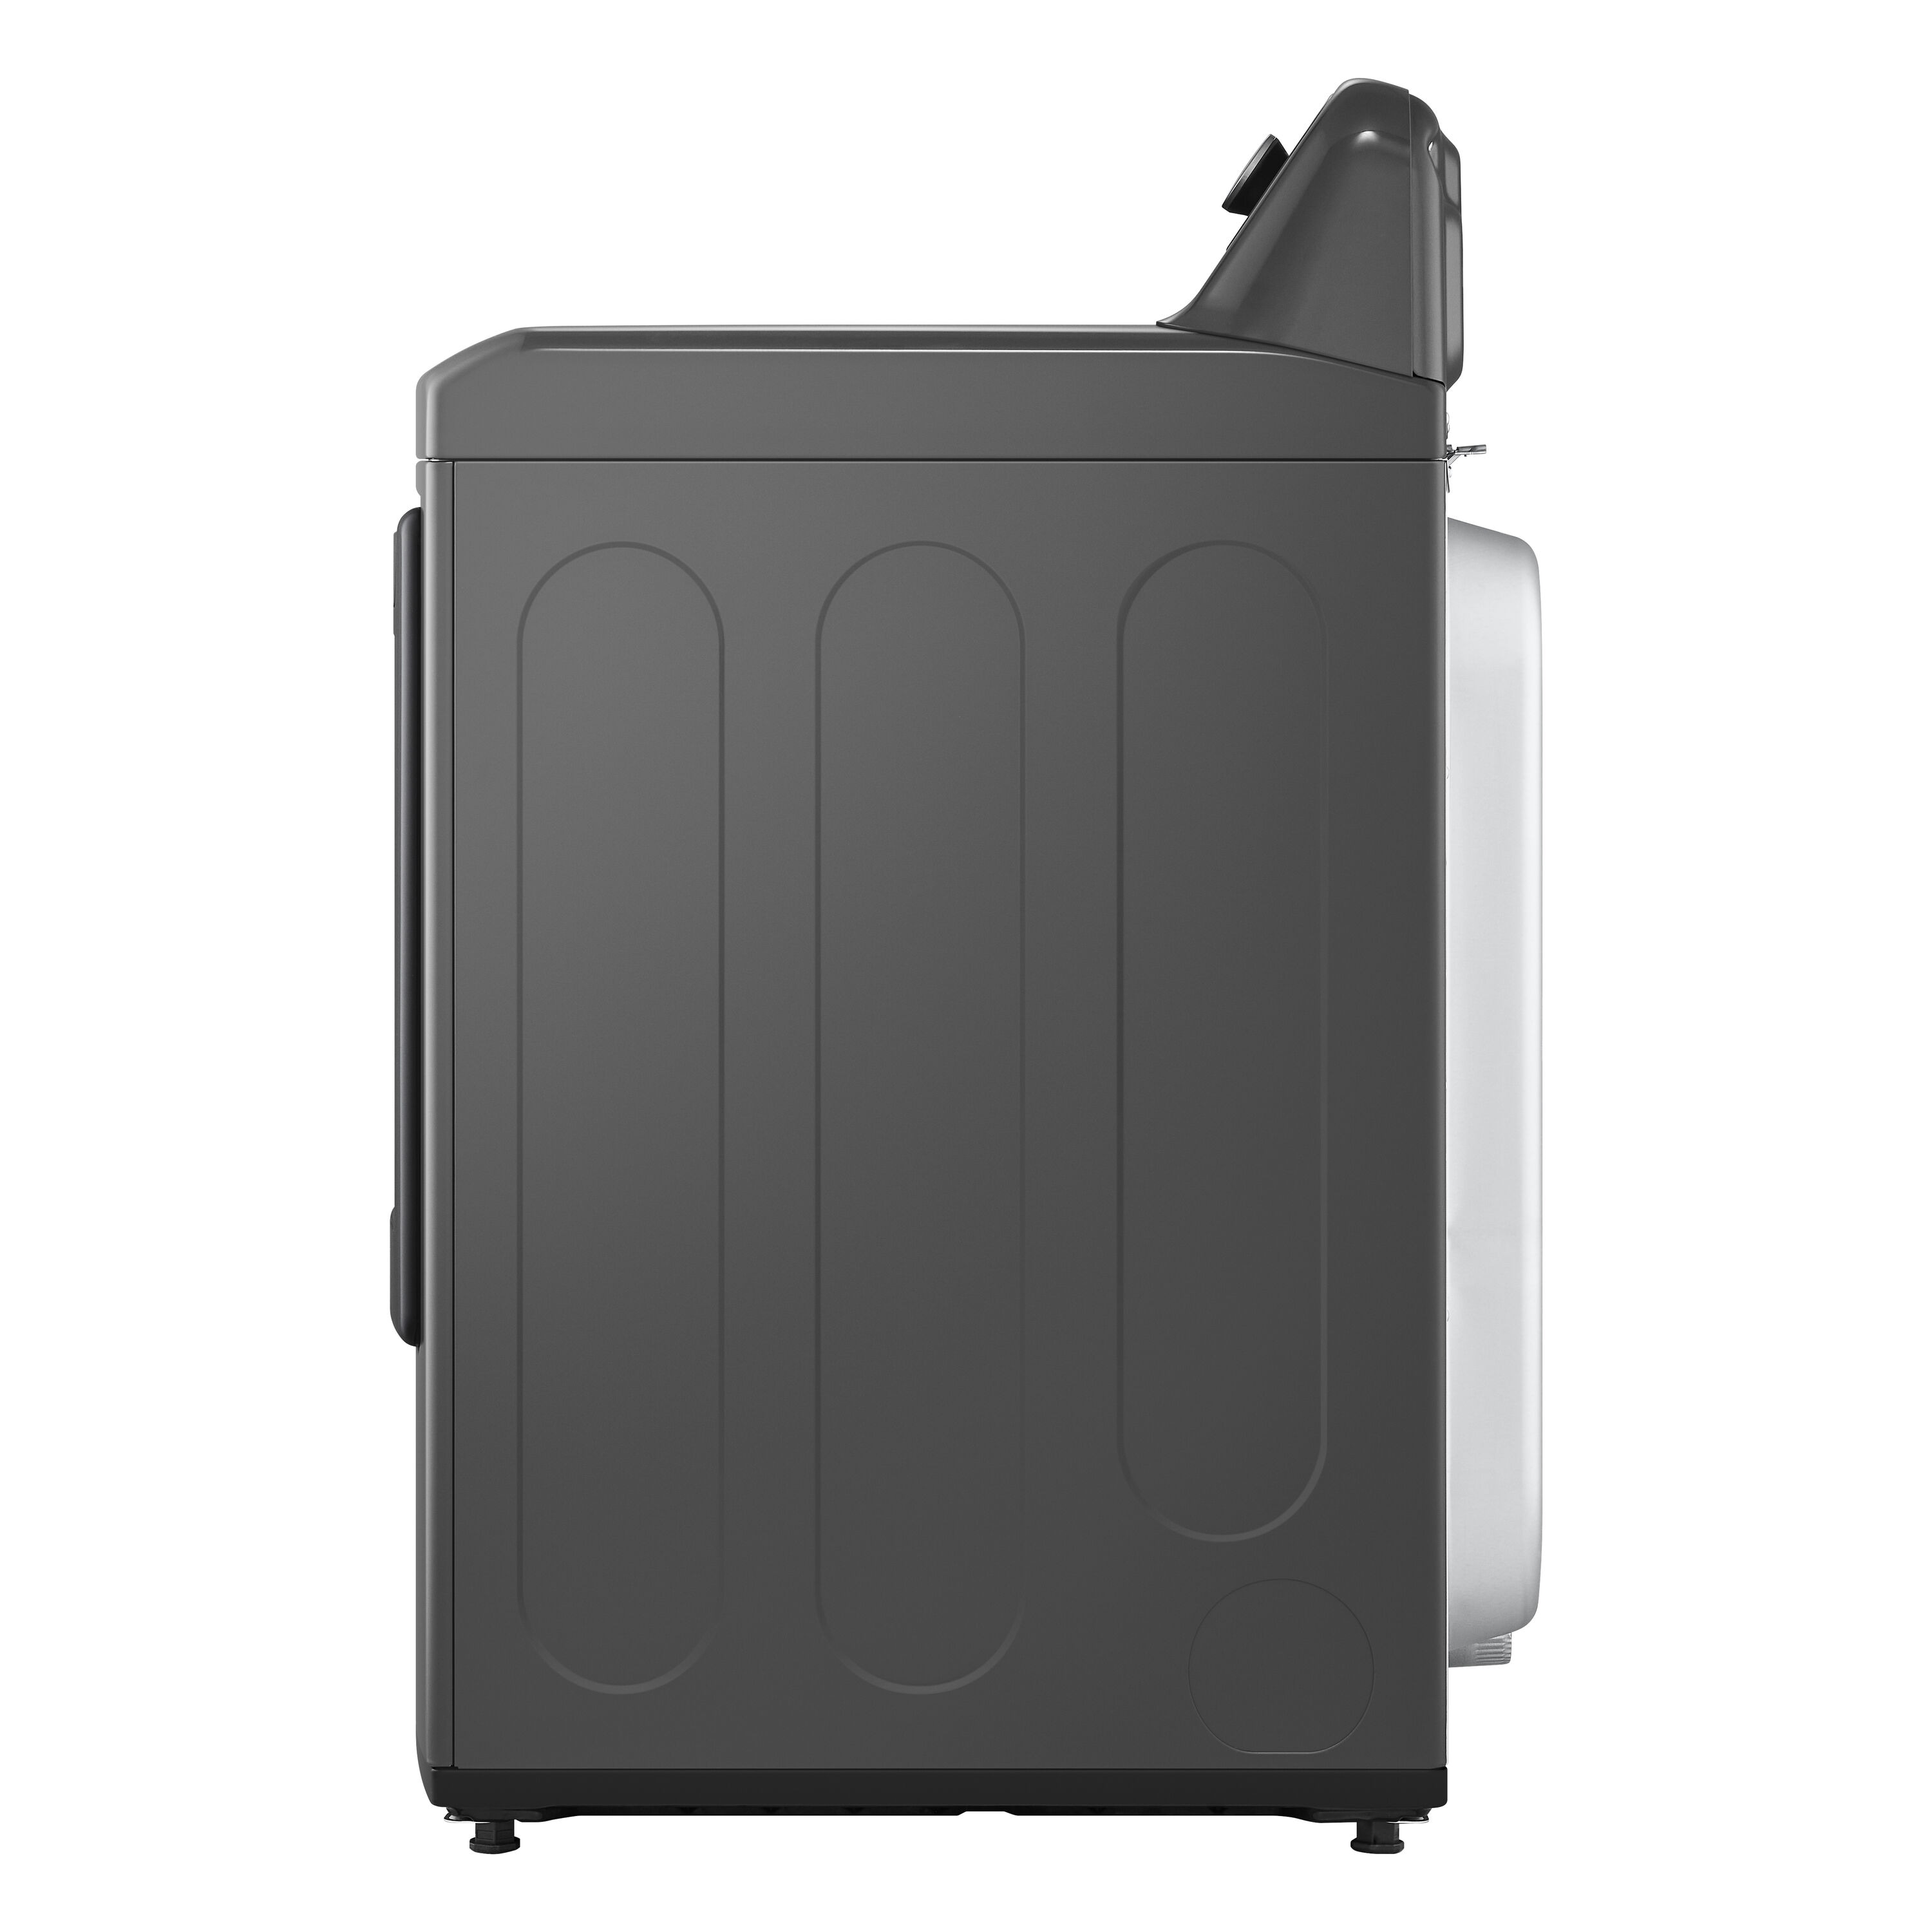 LG 7.3-cu Reversible Side Door Gas Dryer (Matte Black) ENERGY STAR in the Gas department at Lowes.com